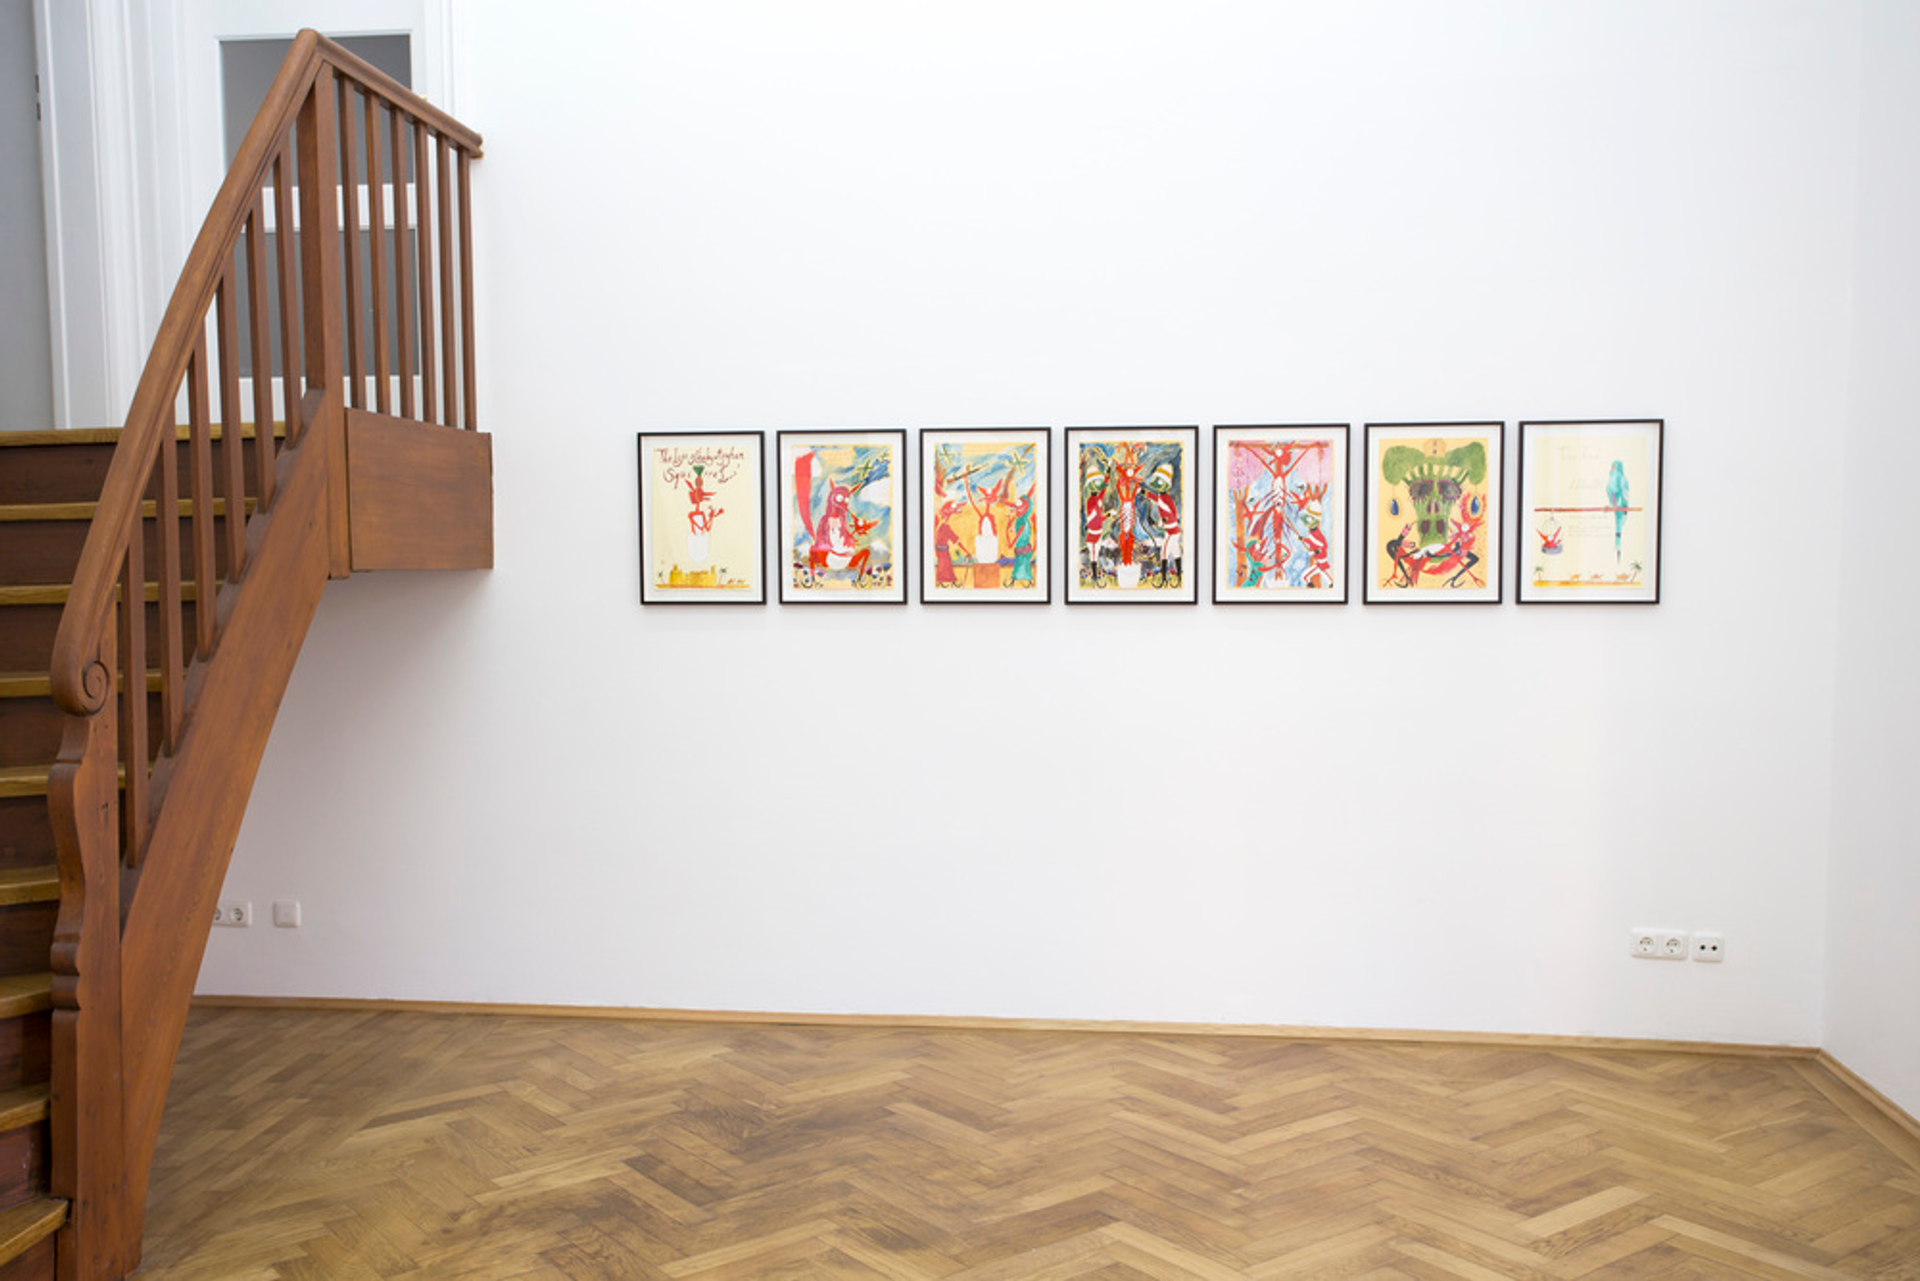 Installation view: “TAUBE x SPERLING #2 'The Life of Baby Afghan Squirrel' by Andrew Gilbert”